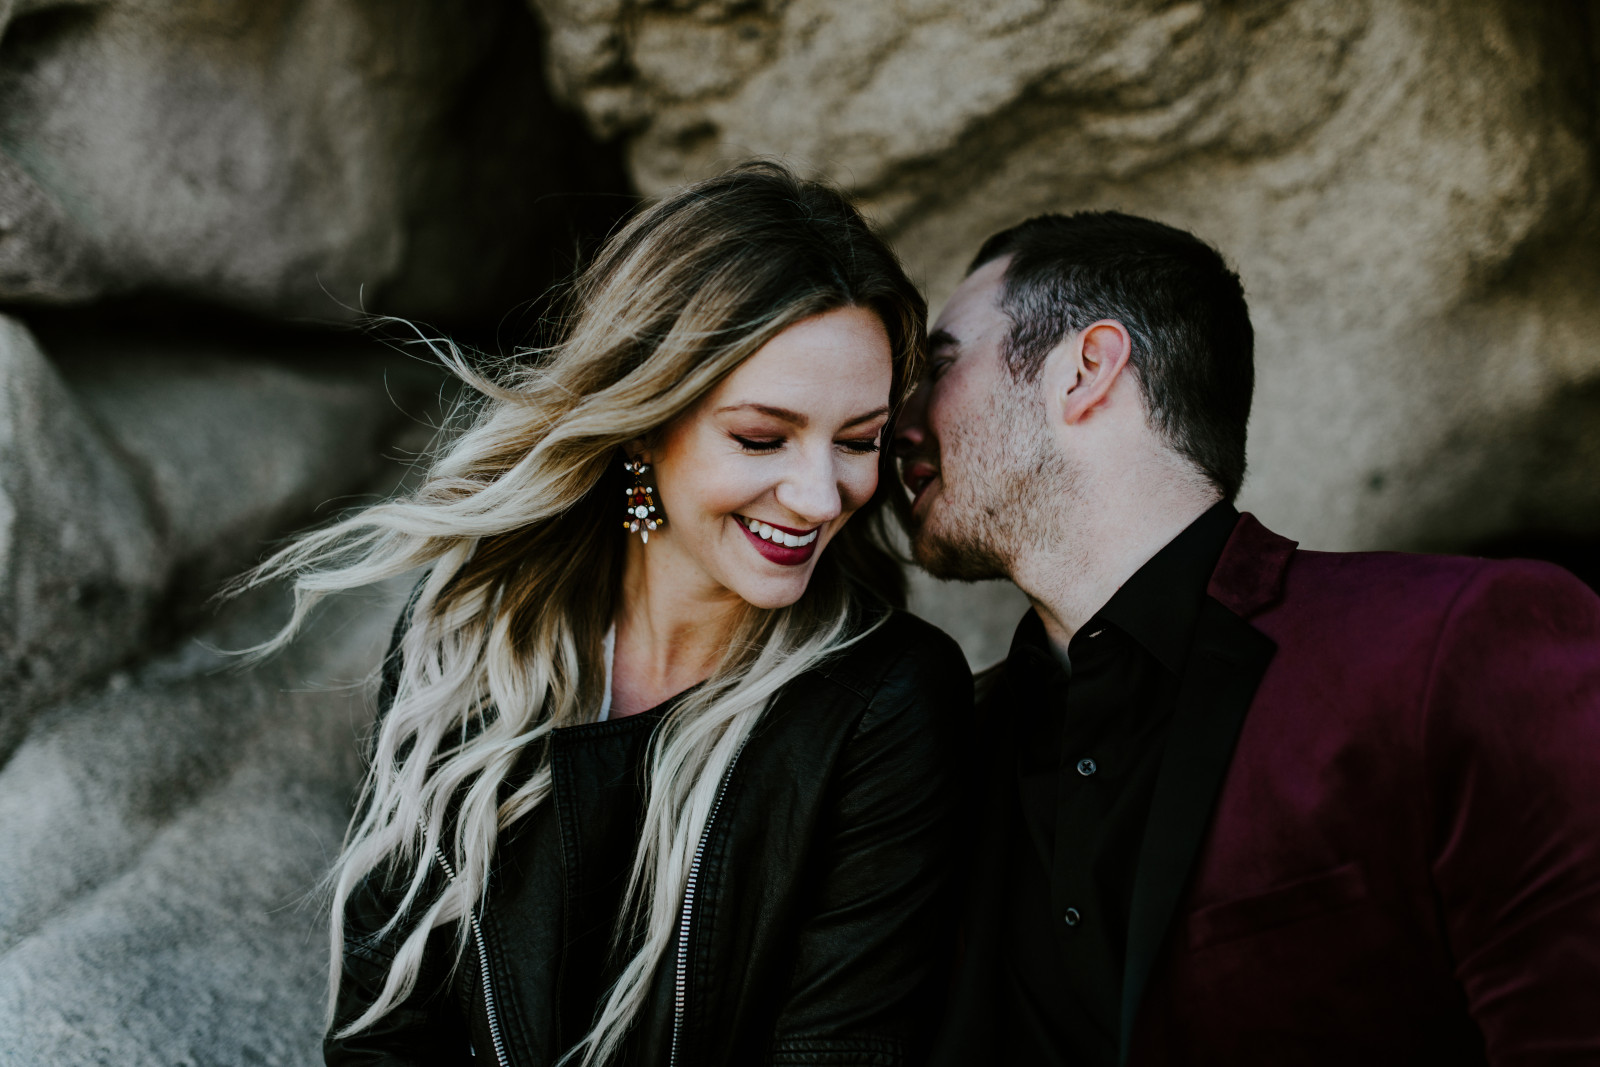 Jeremy whispers to Alyssa. Elopement wedding photography at Joshua Tree National Park by Sienna Plus Josh.